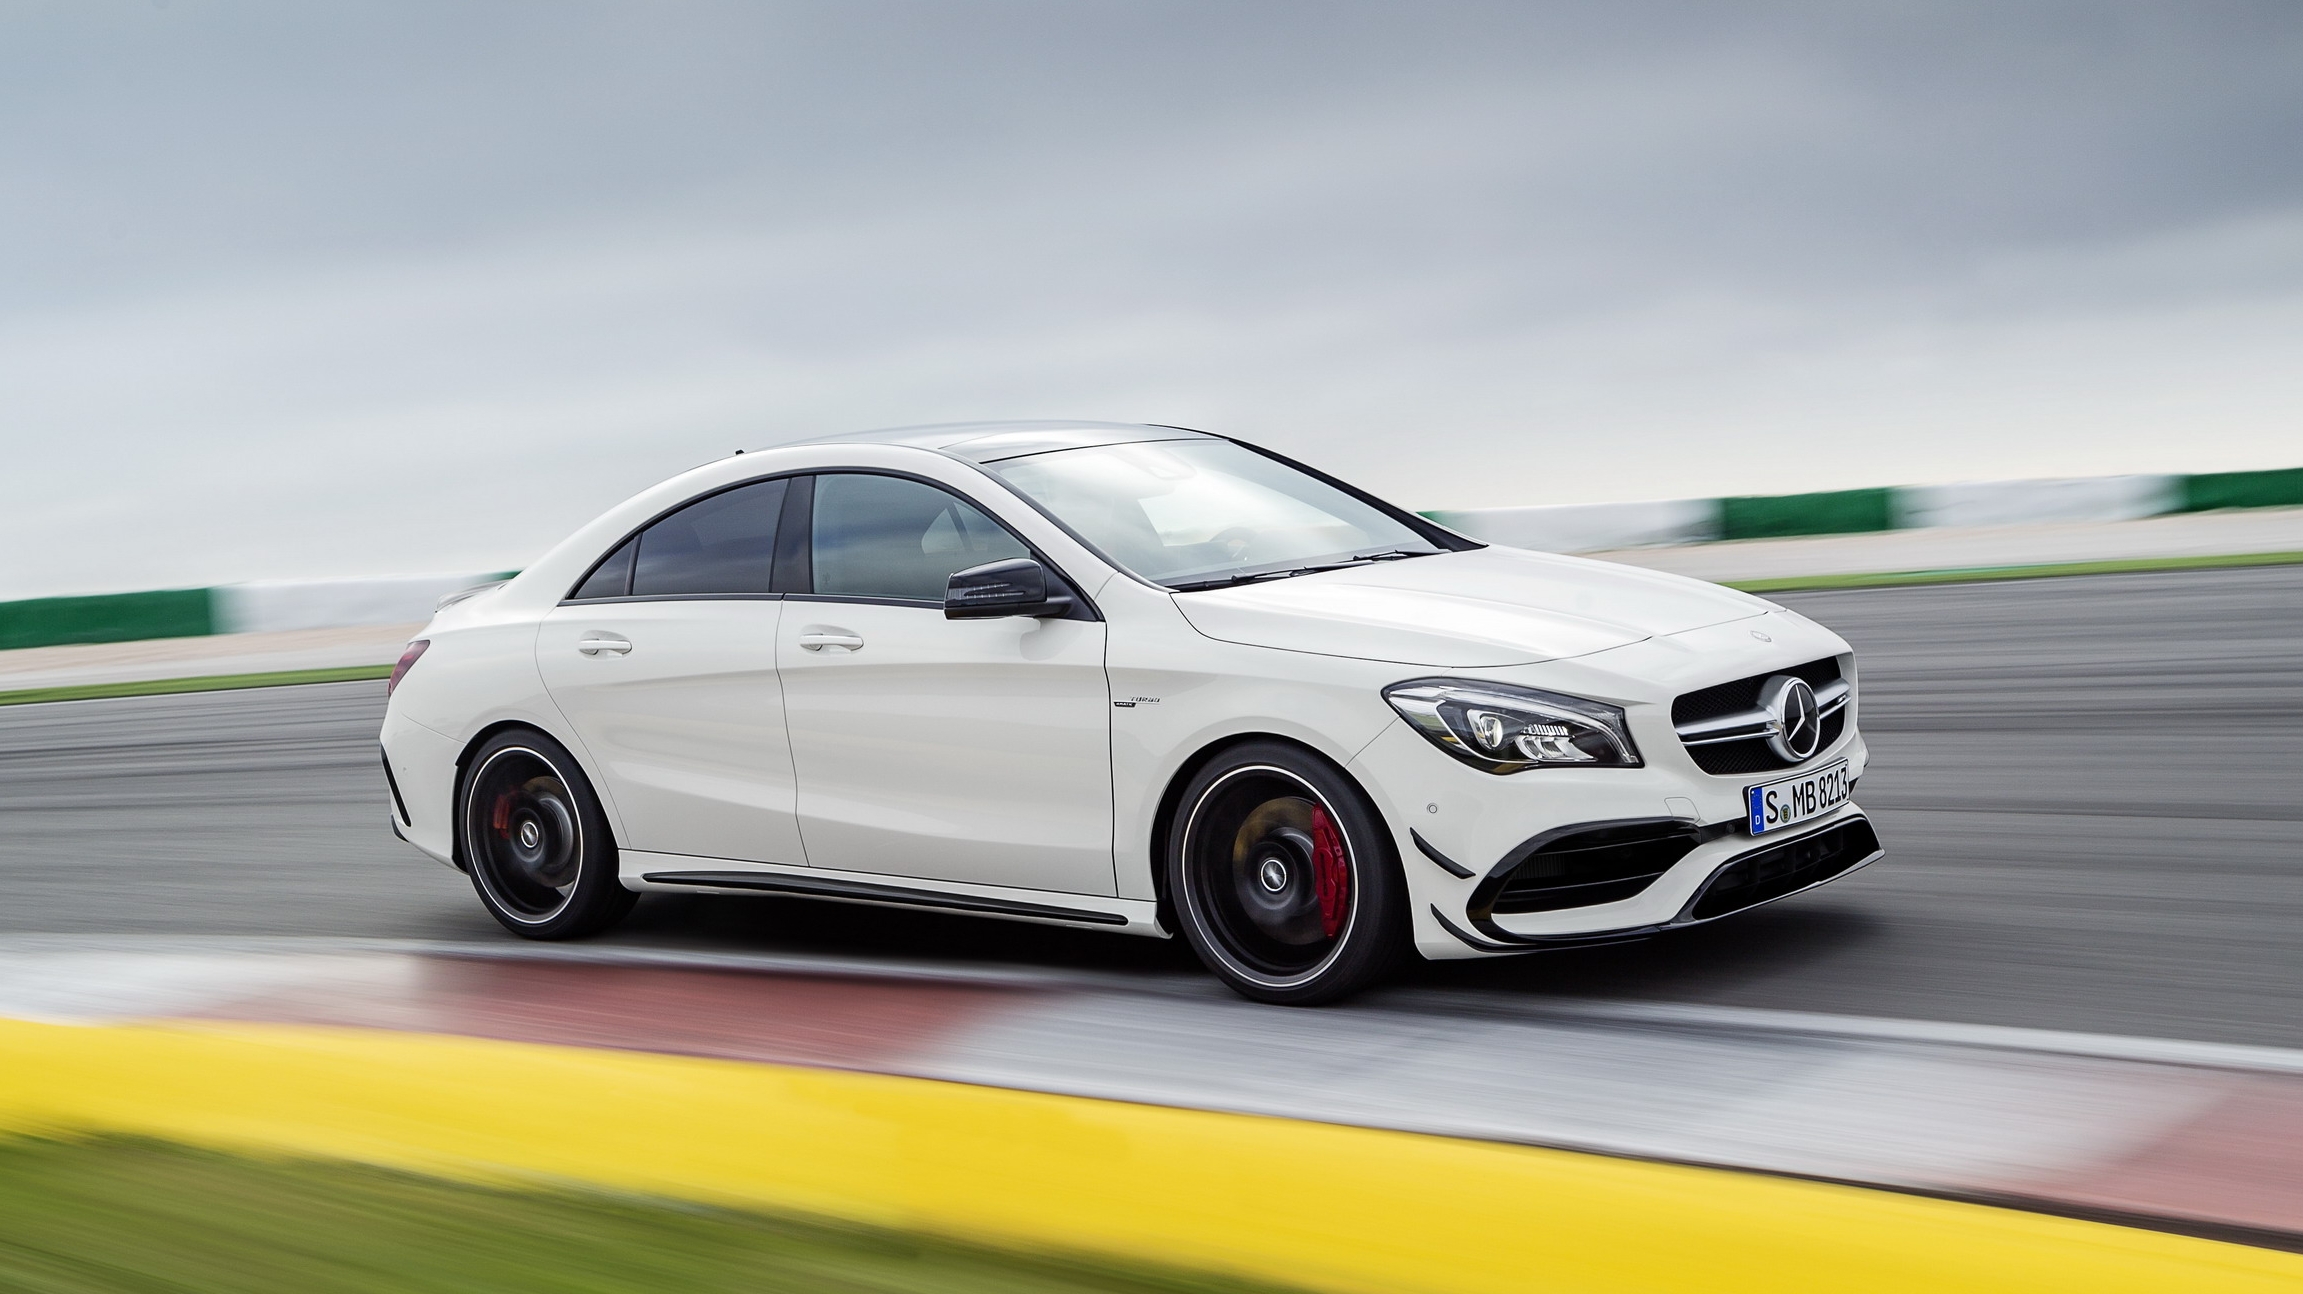 2017 Mercedes-amg Cla45 Pictures, Photos, Wallpapers - Cla 250 Amg 2017 , HD Wallpaper & Backgrounds